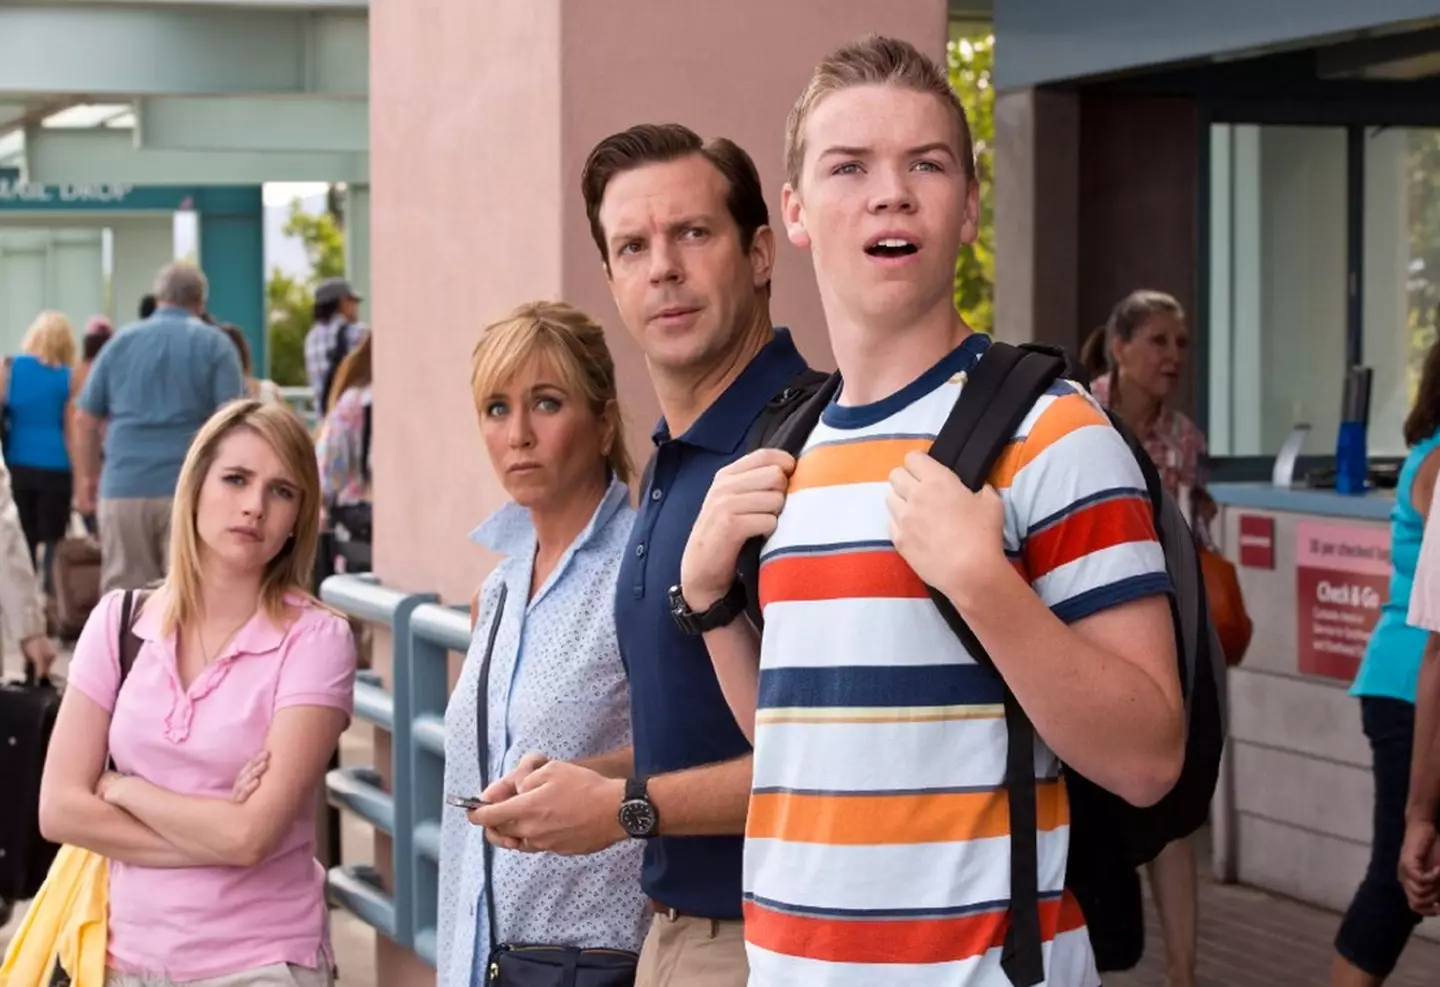 Poulter made a name for himself playing geeky teen Kenny in We’re the Millers.